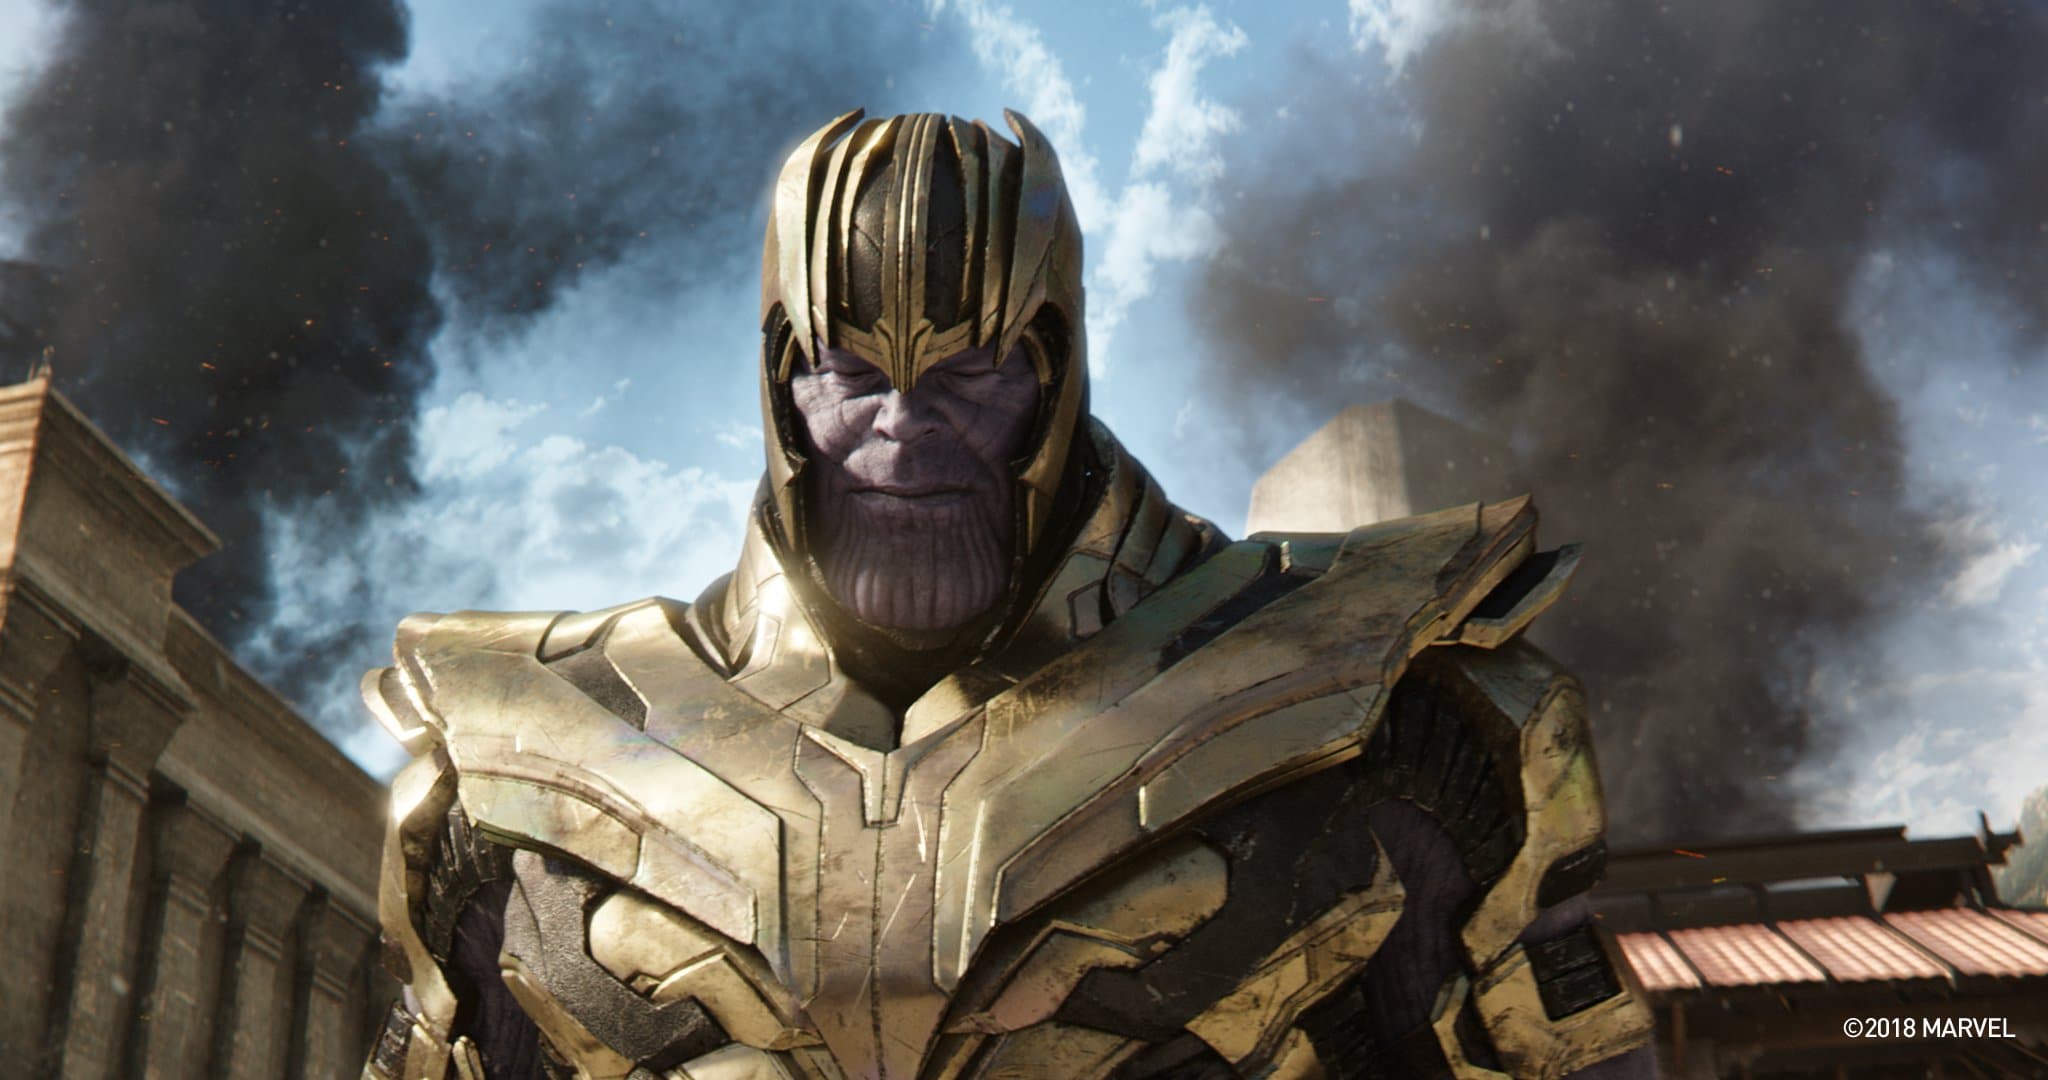 Thanos’ Motives In First Avengers Film Explained In A New Fan-Theory